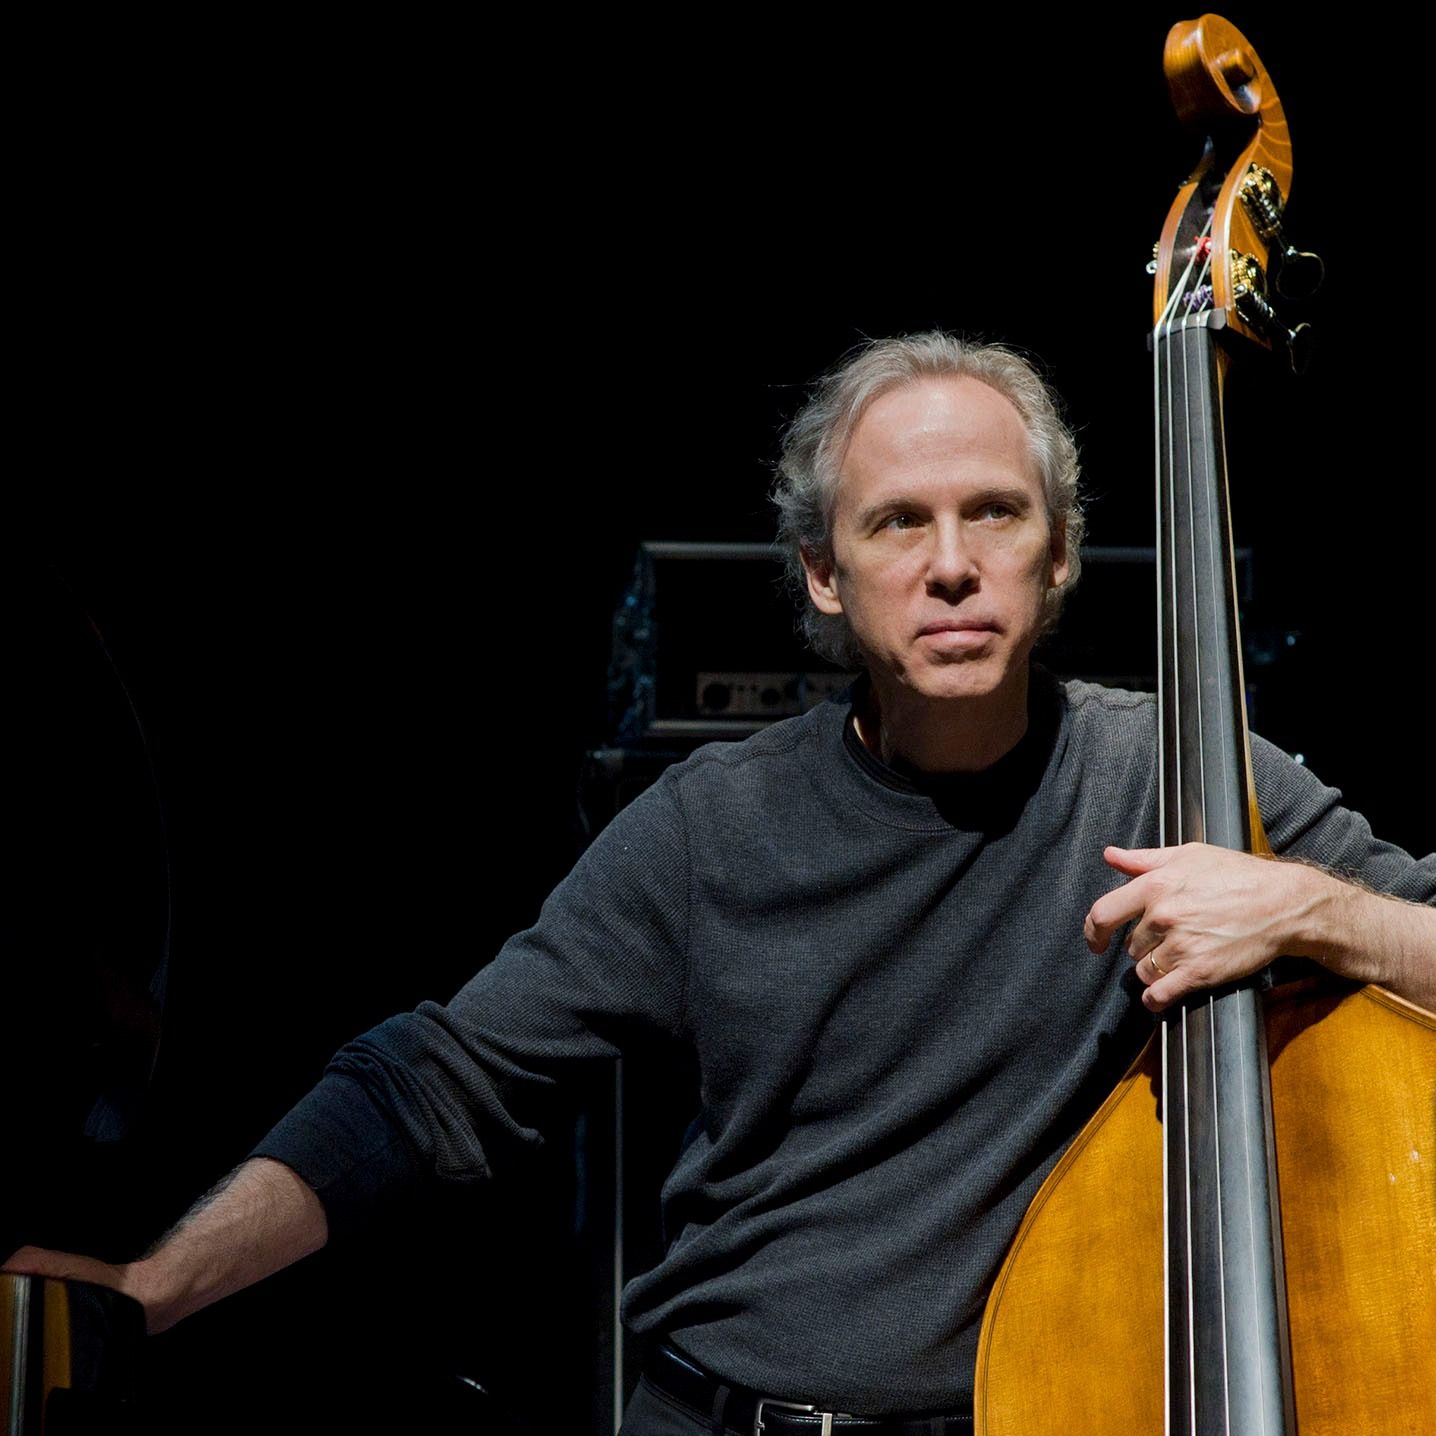 Marc Johnson - Renowned Jazz Bassist, Band Leader And Producer. Played With Woody Herman, Bill Evans, Stan Getz, Pat Metheny, Peter Erskine, Eliane Eliase And More!